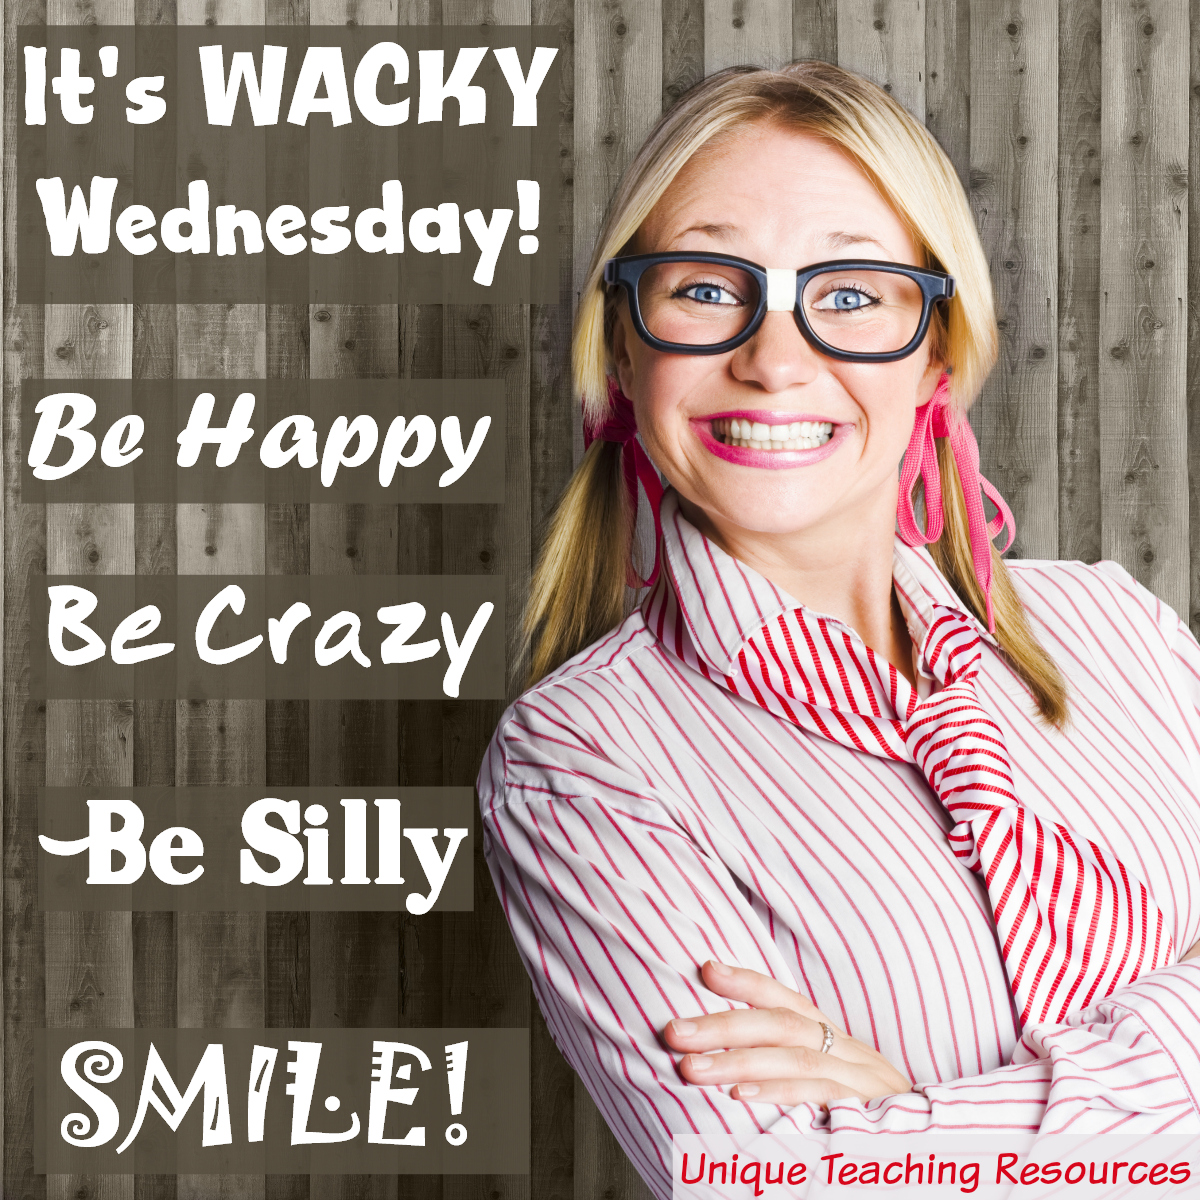 20+ Sayings and Quotes about Wednesday